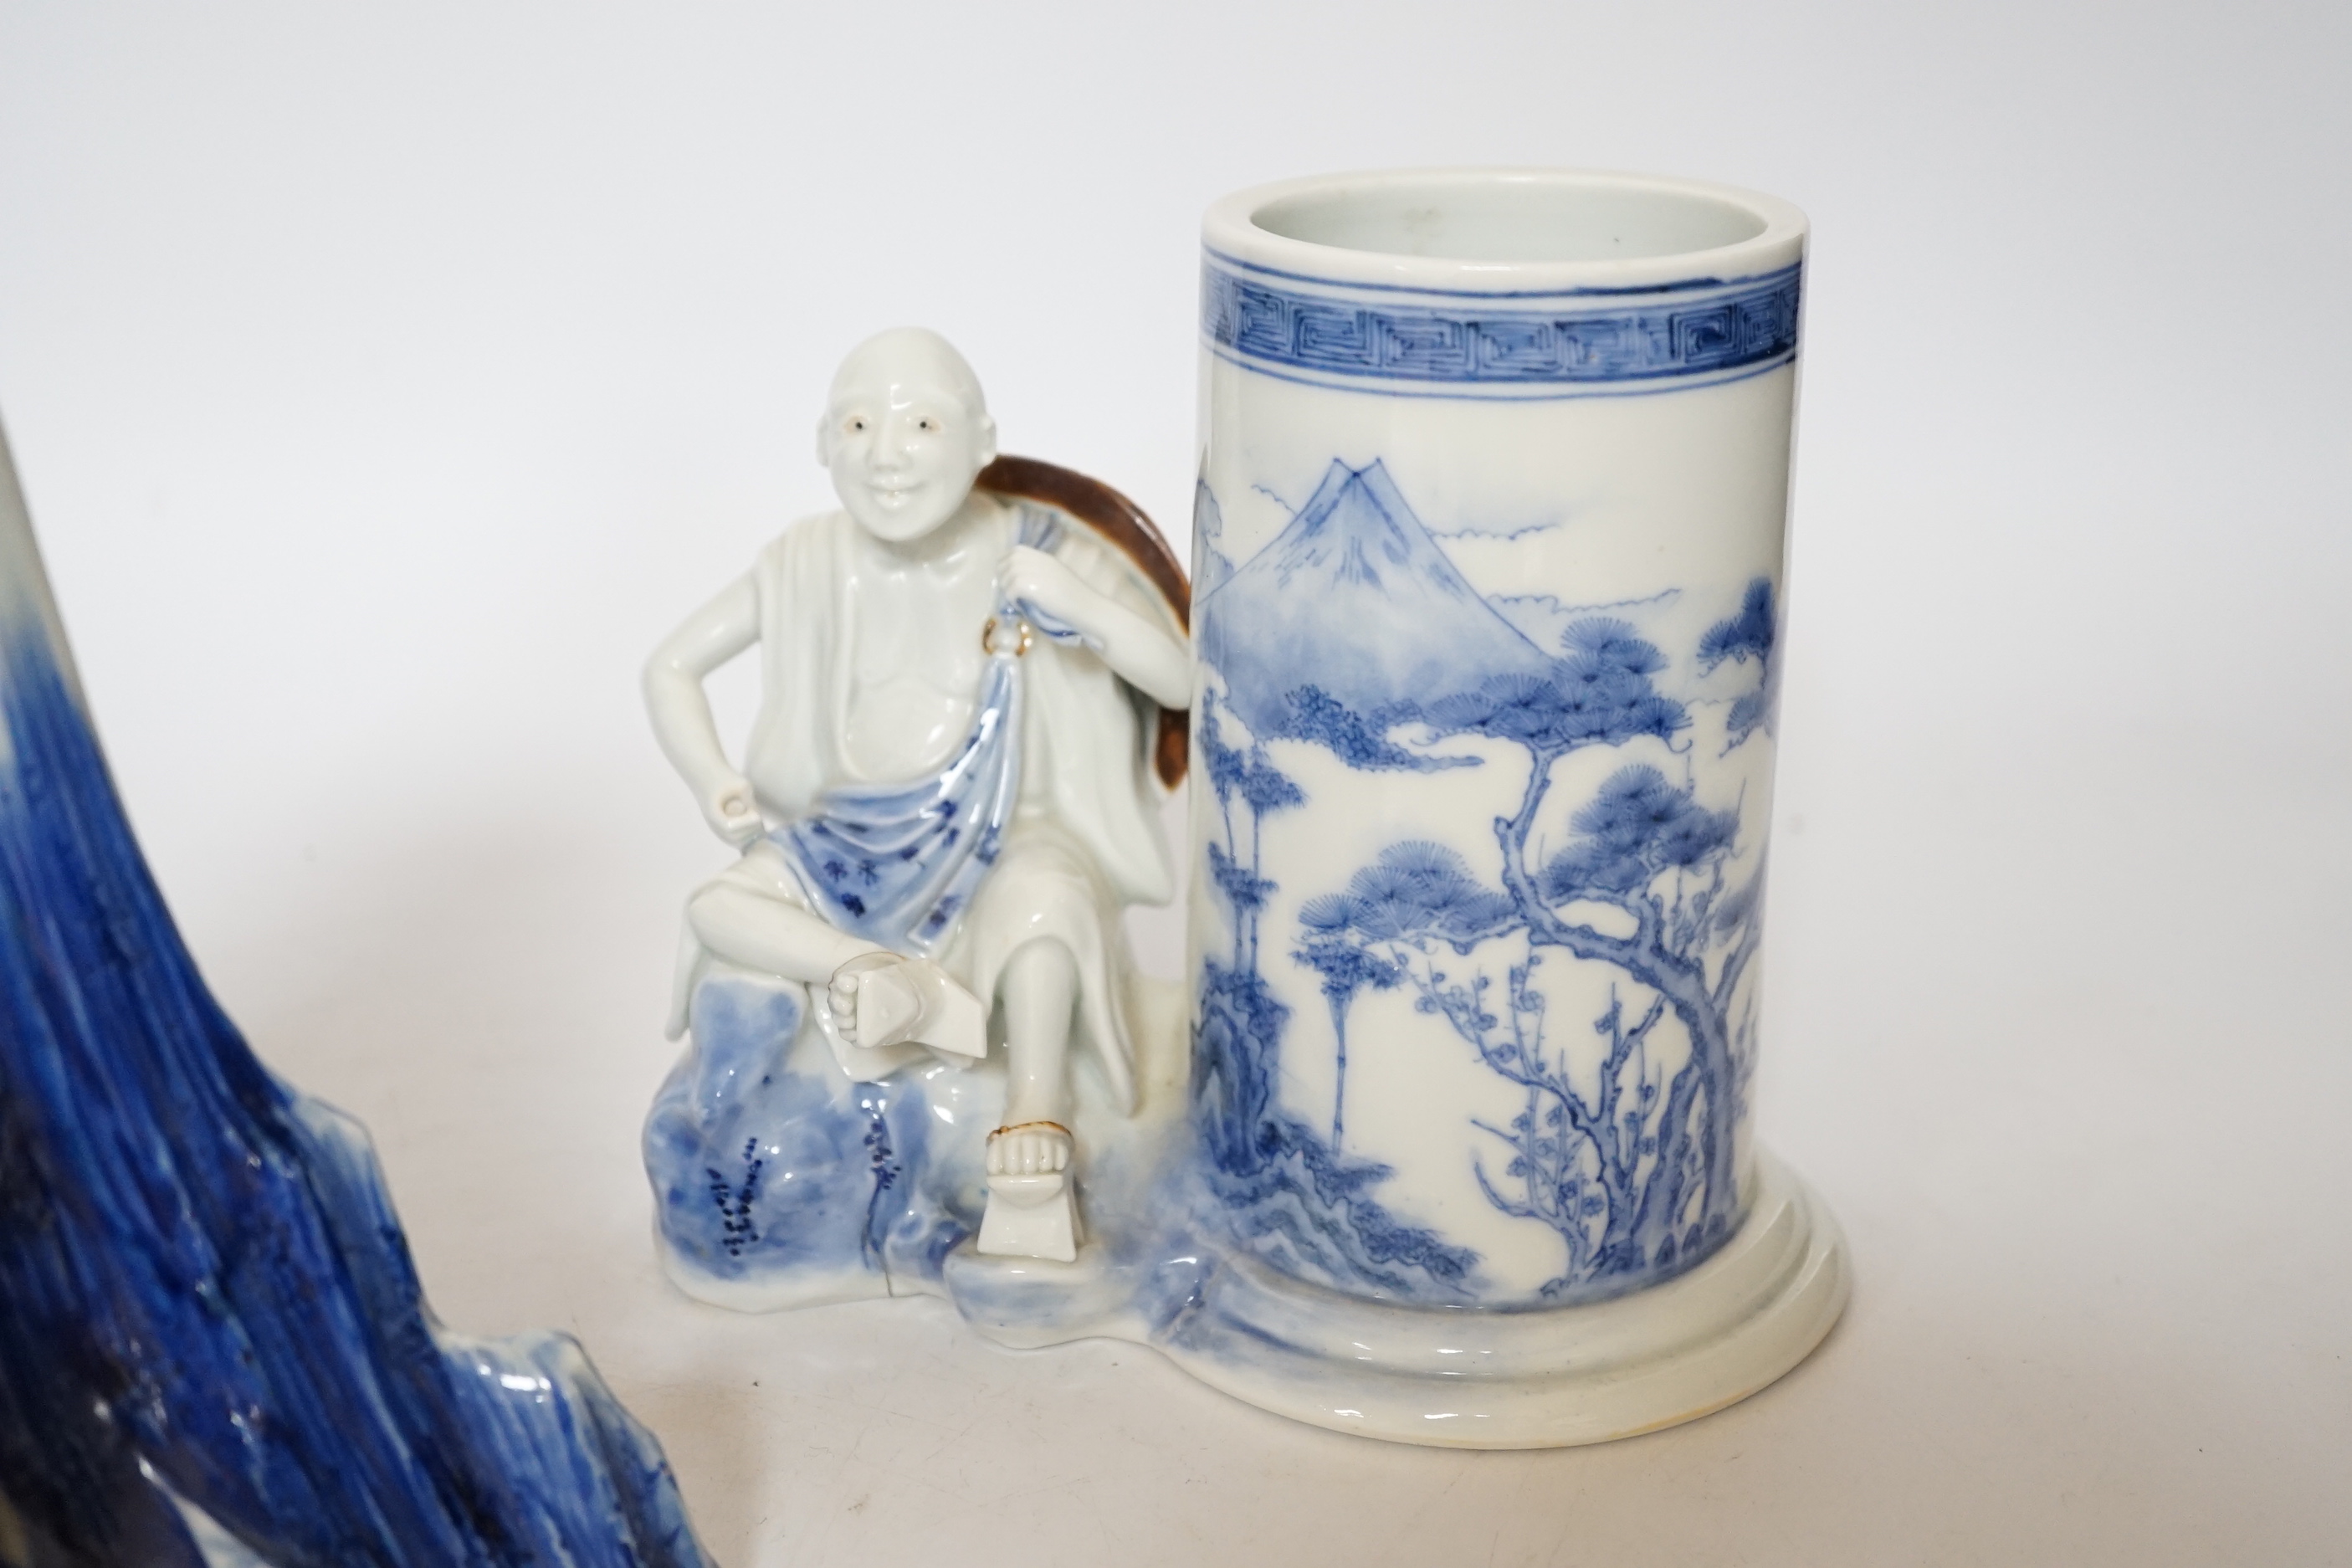 An early 19th century Japanese Hirado blue and white model of a monk seated by Mount Fuji, and a similar brush pot modelled with a fisherman seated by the cylindrical vessel, largest 17cm high (2)